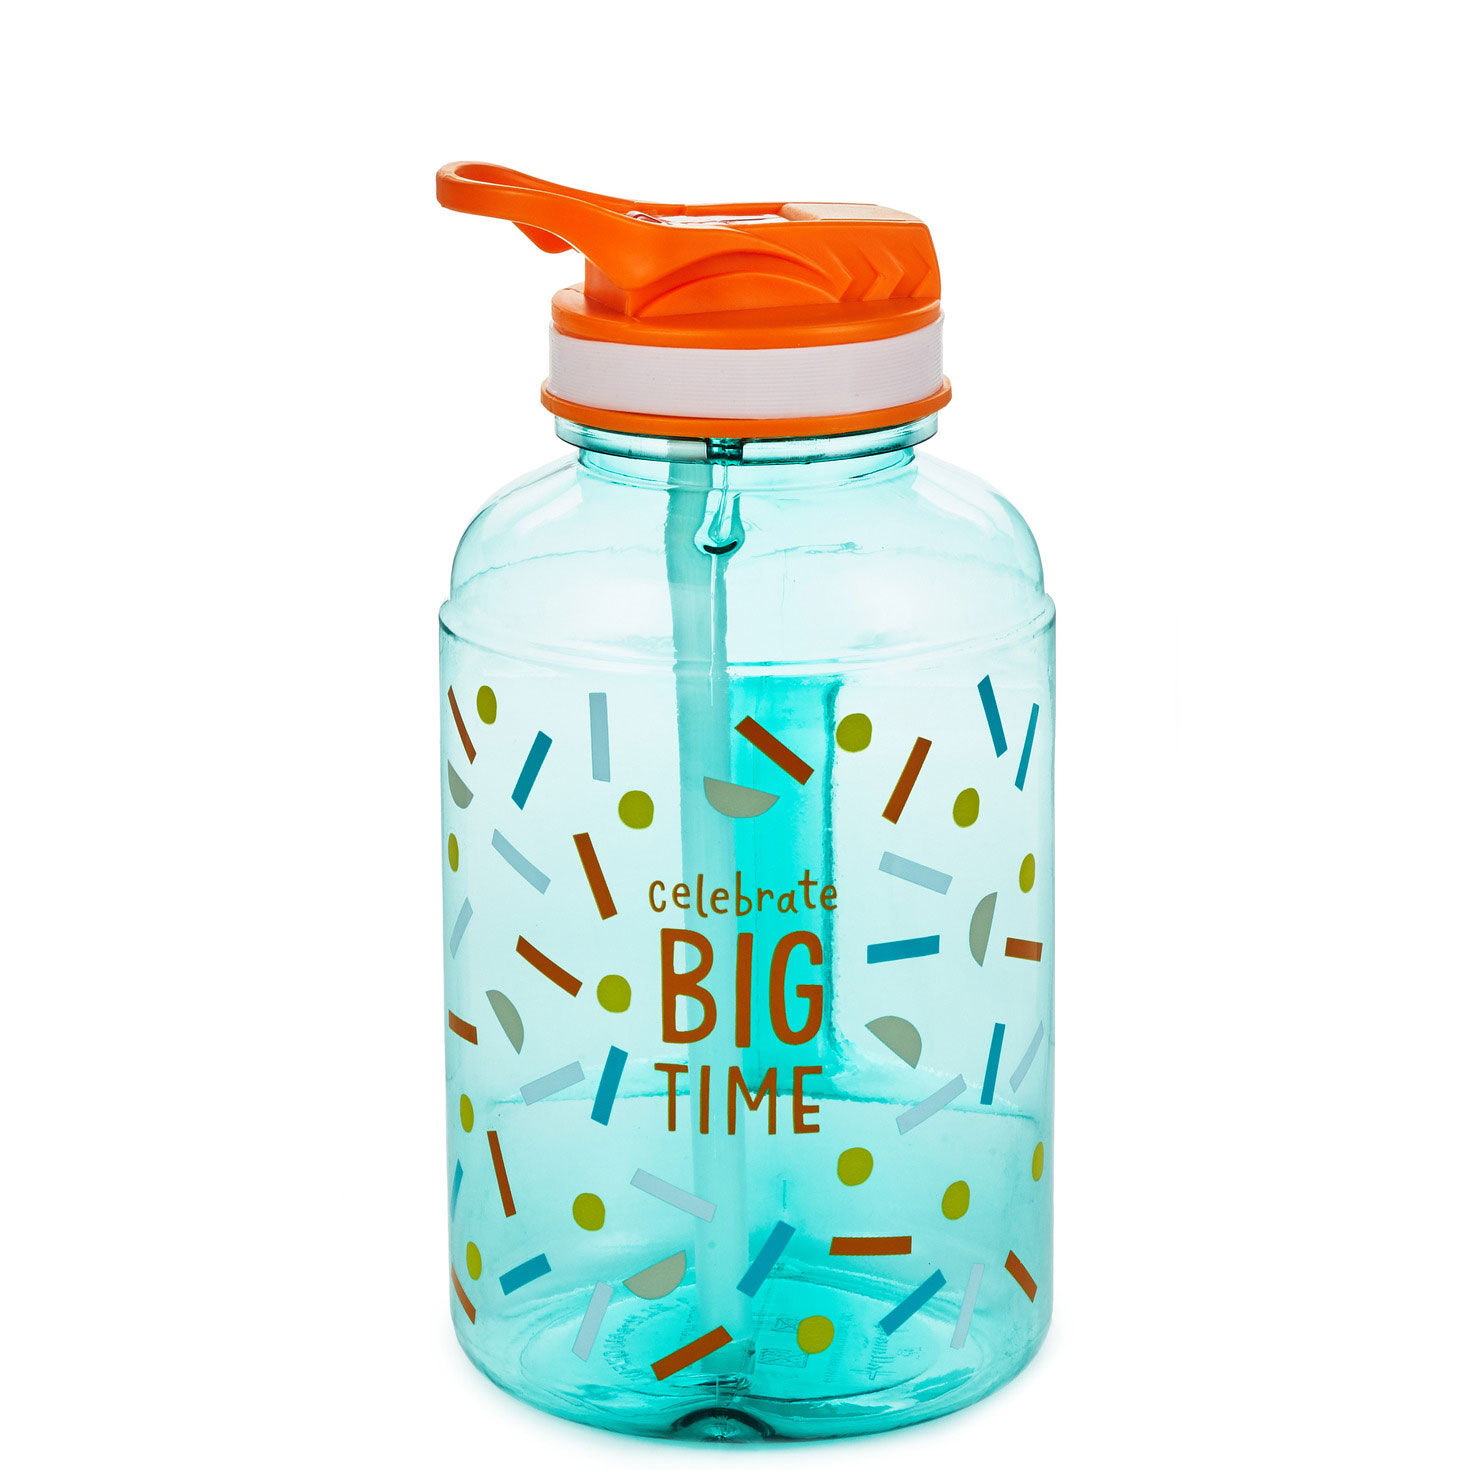 https://www.hallmark.com/dw/image/v2/AALB_PRD/on/demandware.static/-/Sites-hallmark-master/default/dwf617e800/images/finished-goods/products/1BID1097/Extra-Large-Blue-Water-Jug-With-Lid-and-Straw_1BID1097_01.jpg?sfrm=jpg